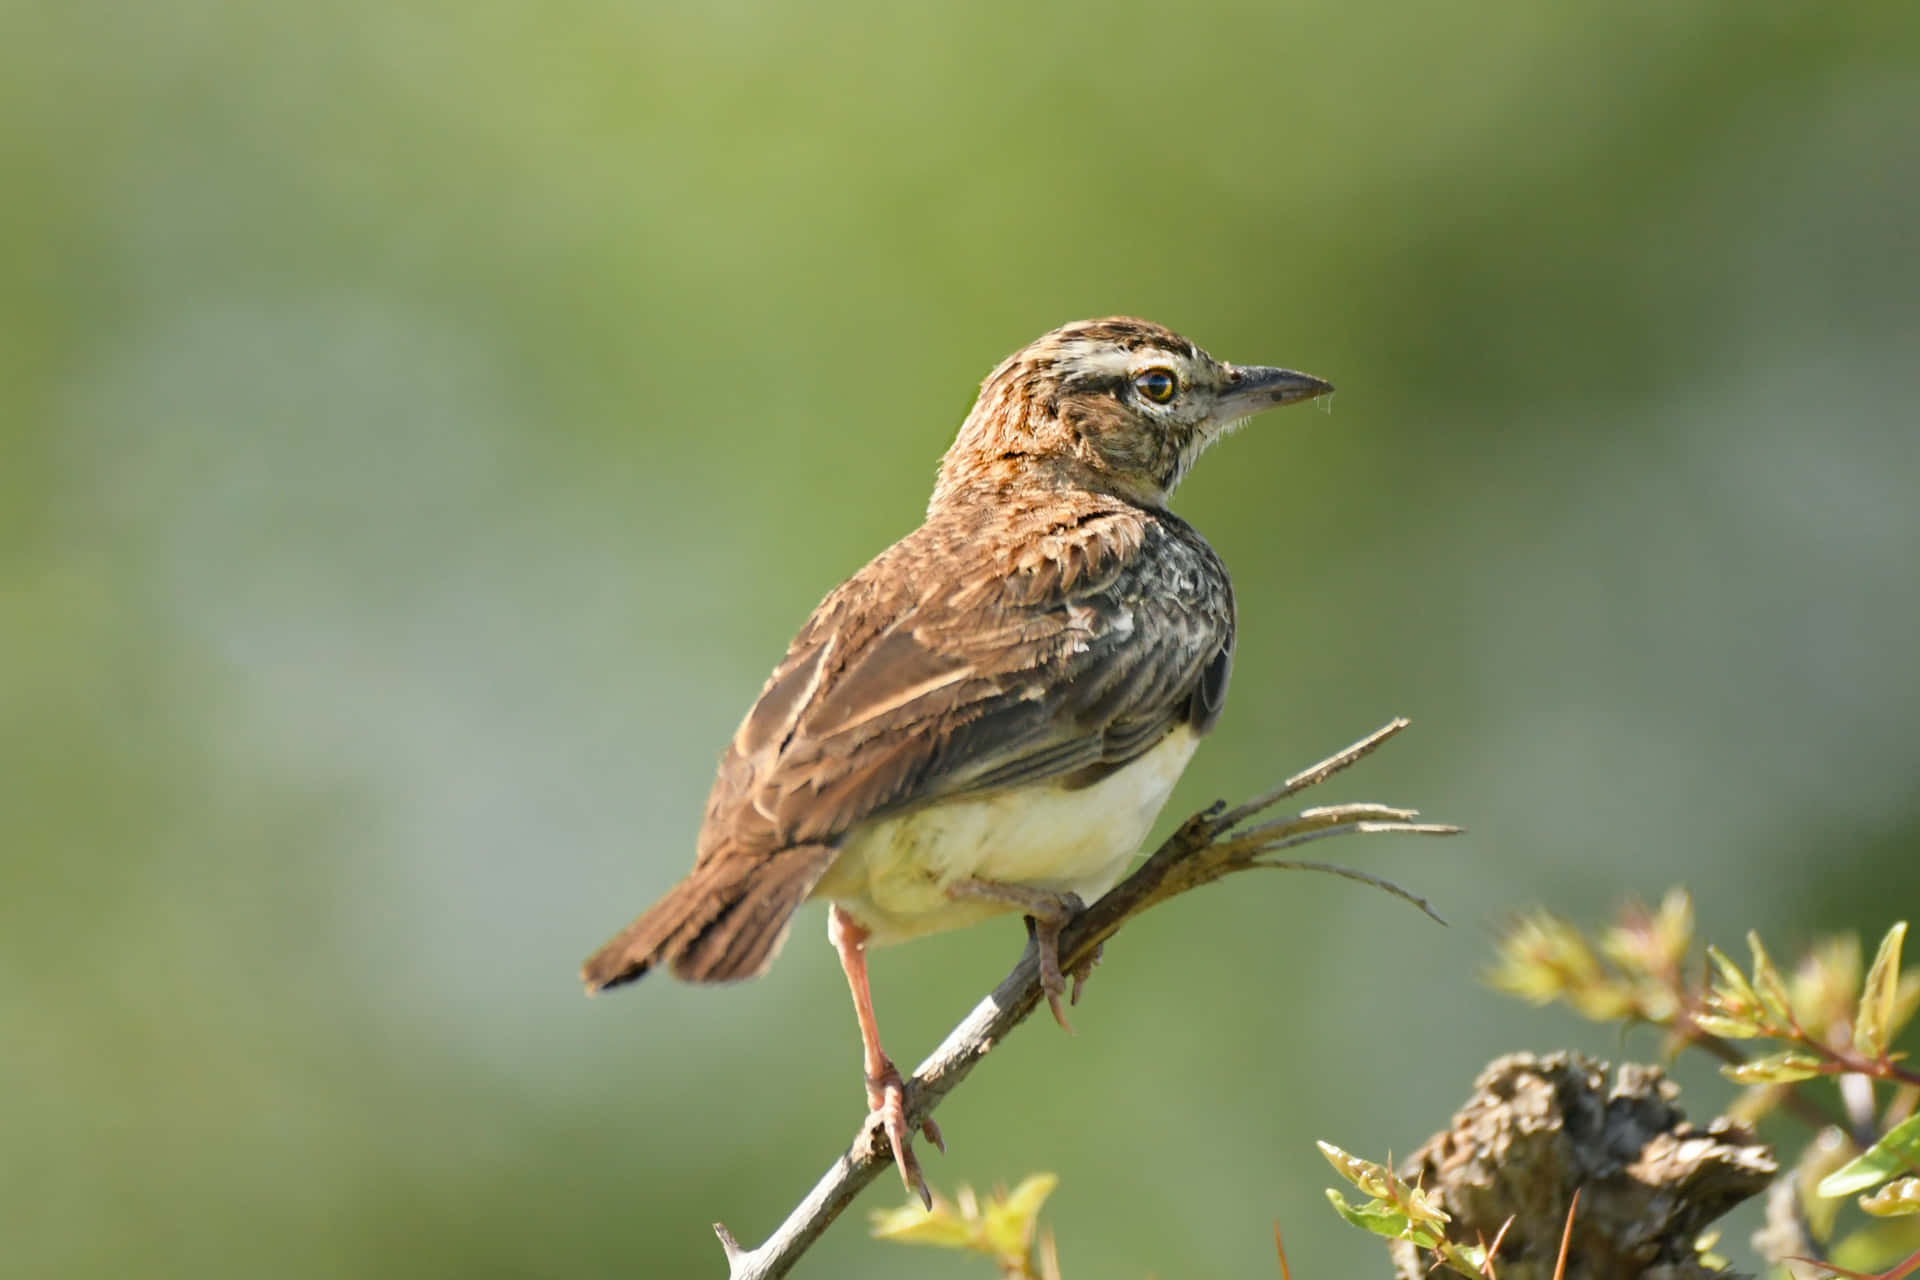 A sparrow perched on top of a tree branch